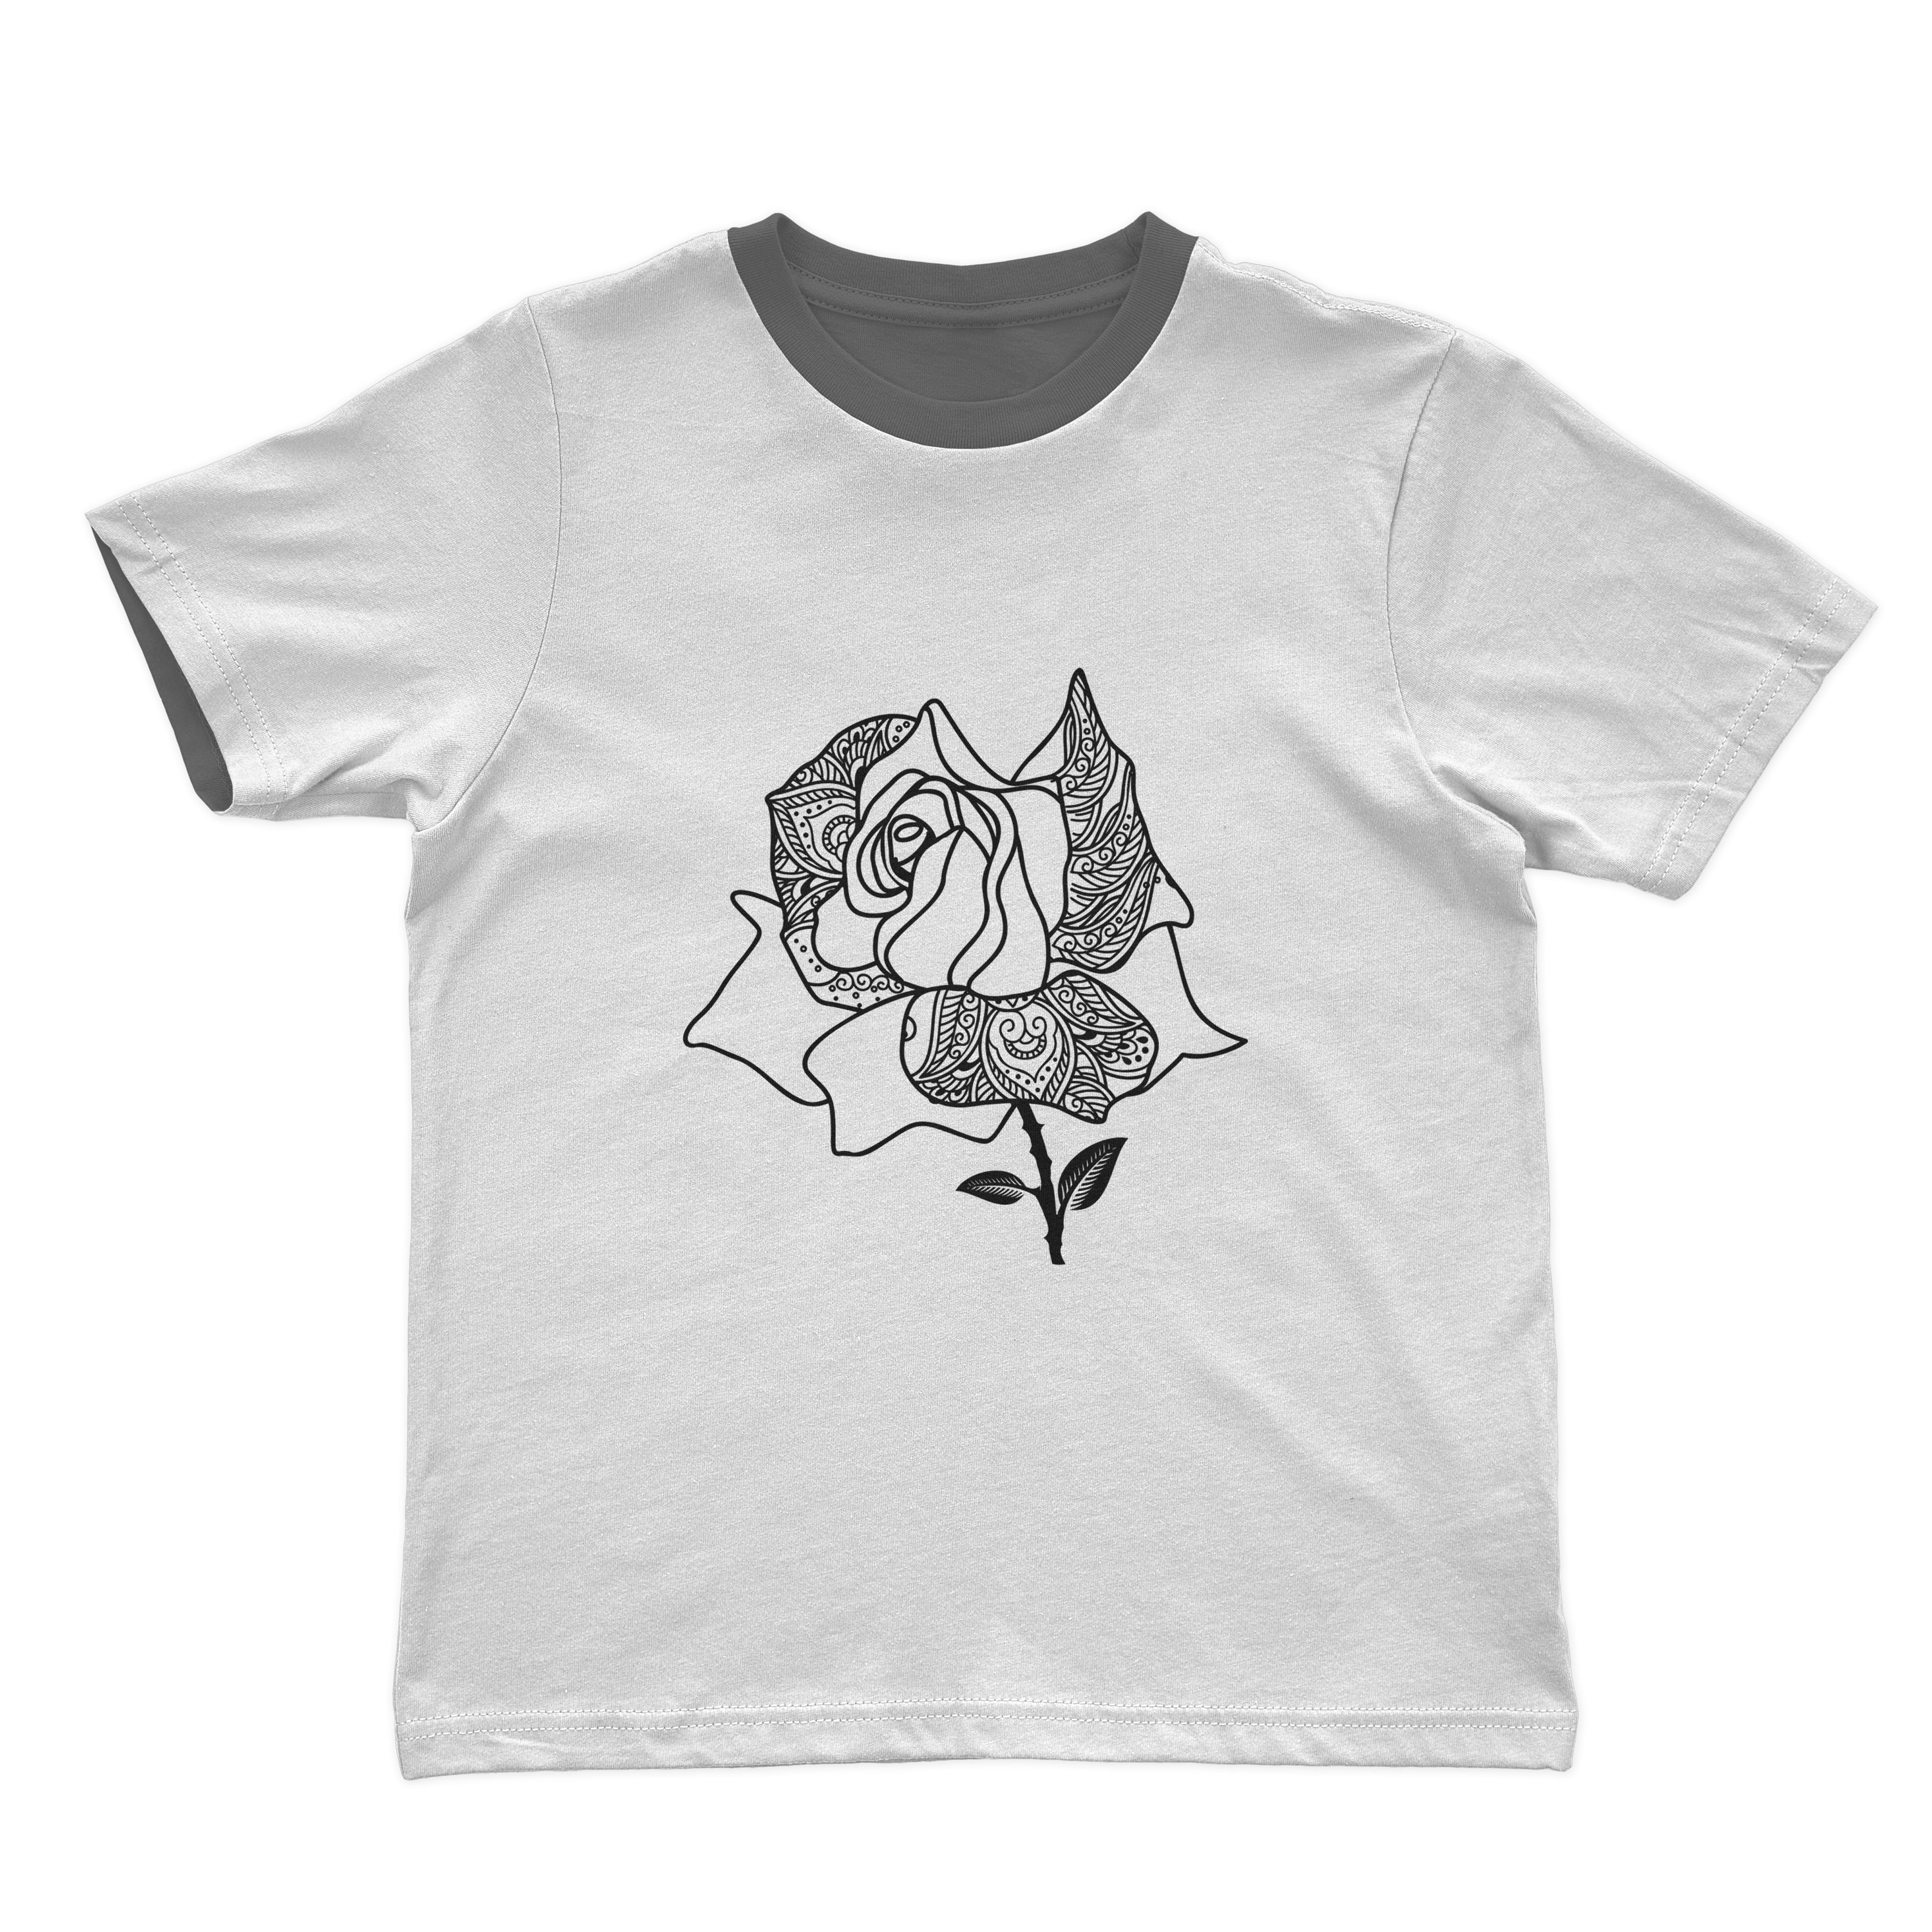 Cute outline rose with mandala ornament.